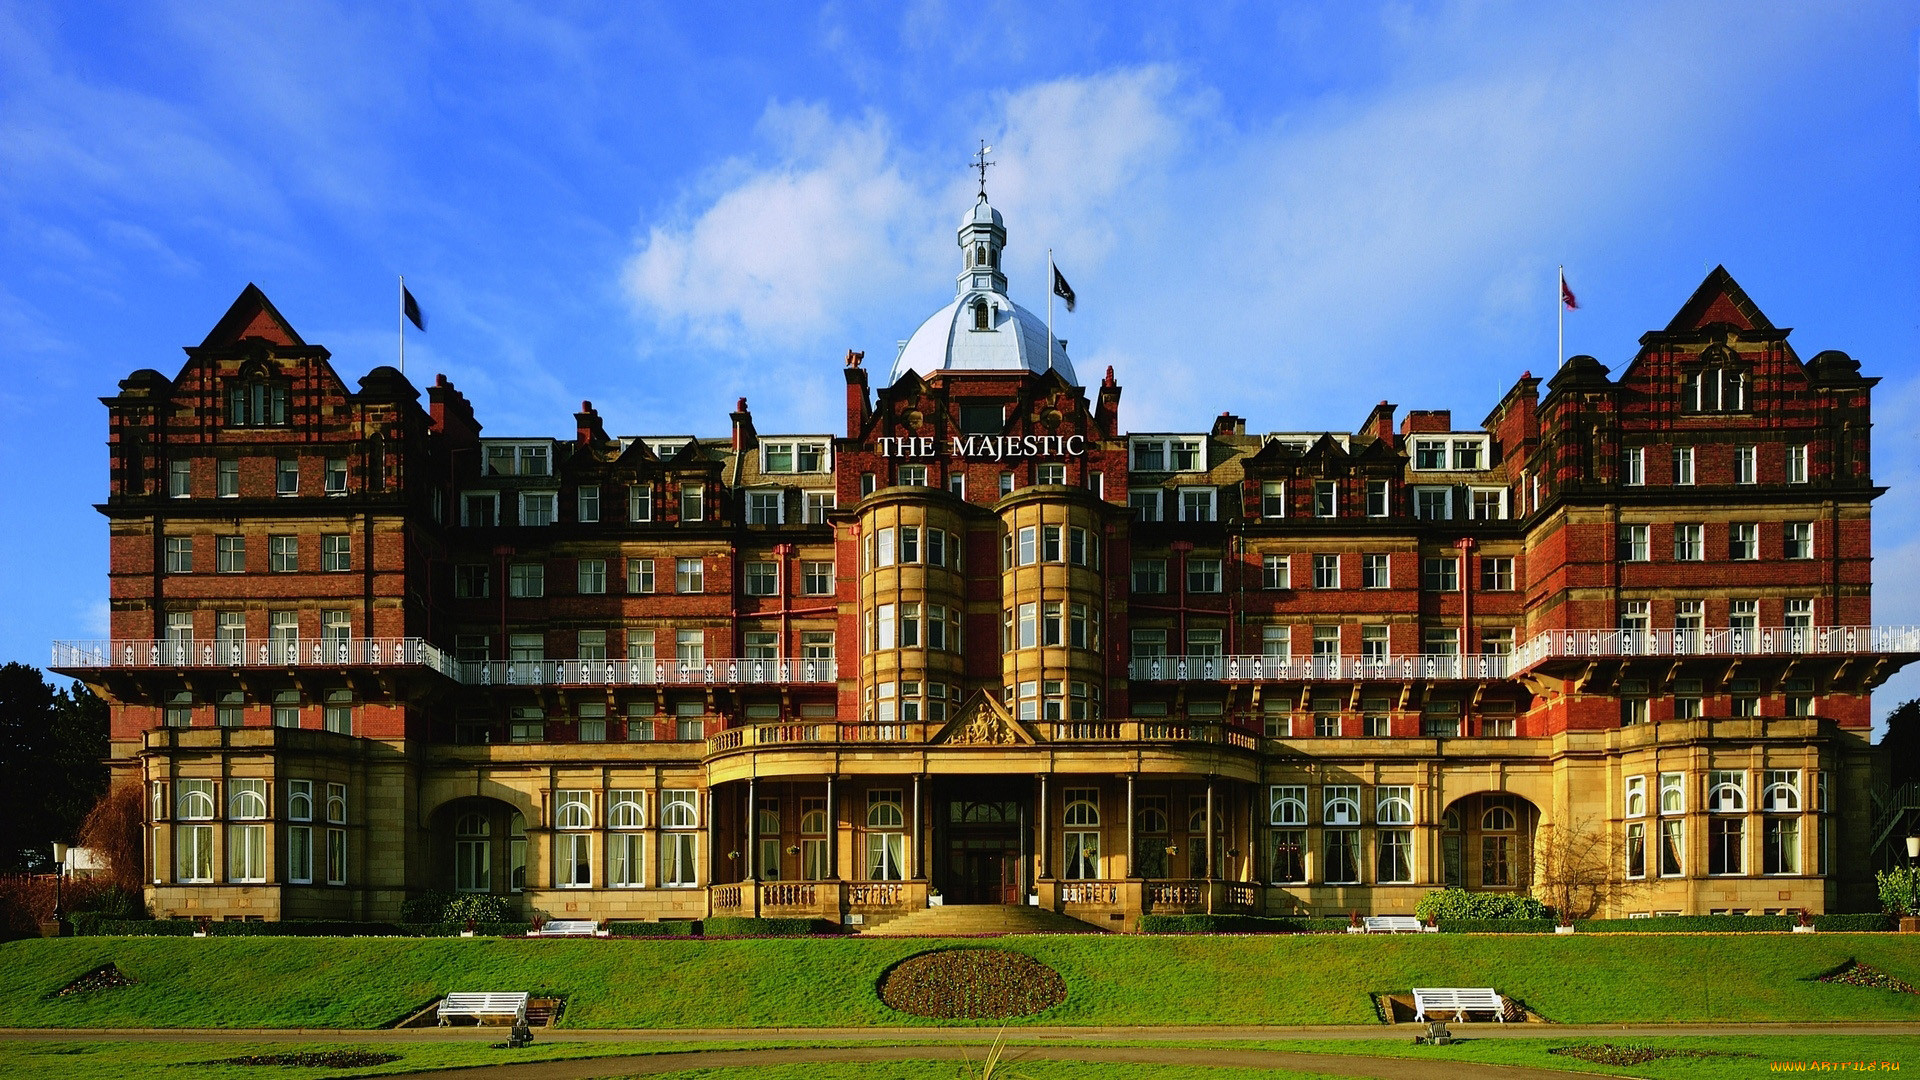 the majestic hotel, north yorkshire, england, , - ,  , the, majestic, hotel, north, yorkshire